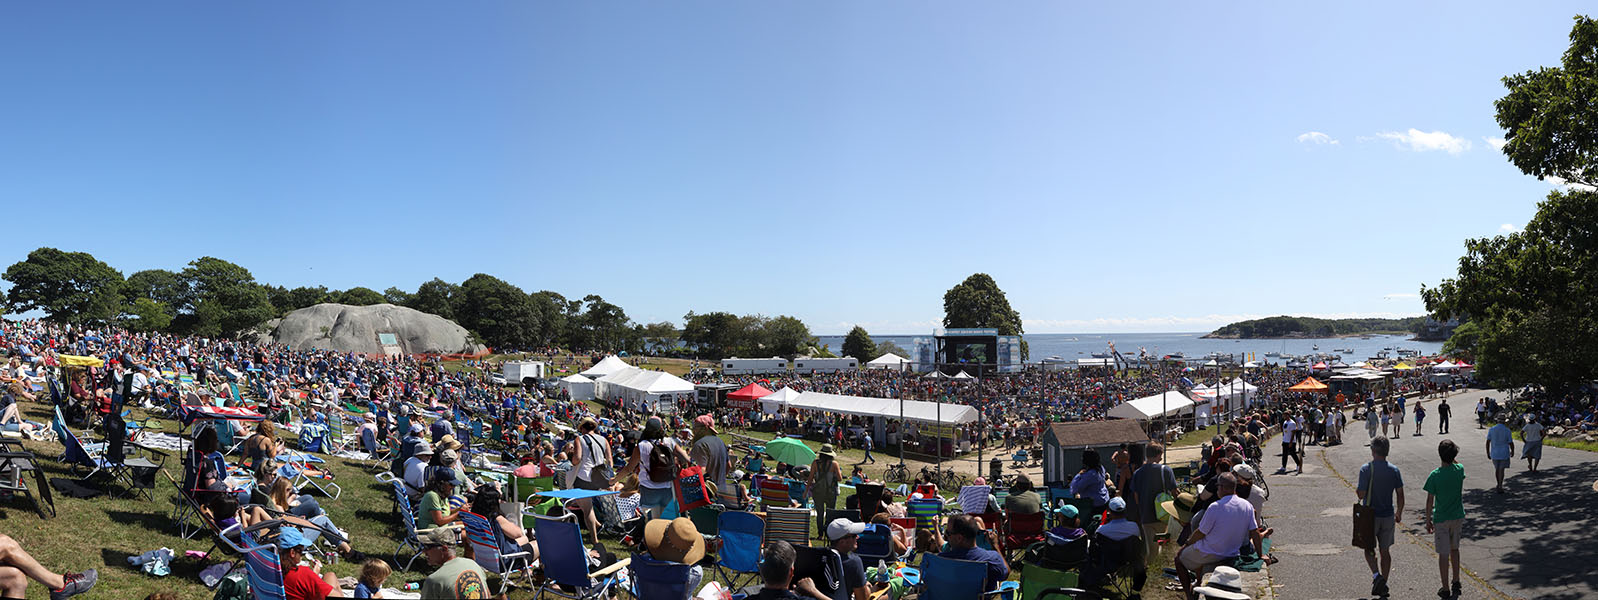 Panoramic View of an Outdoor Music Festival in Stage Fort Park, Gloucester, Massachusetts.